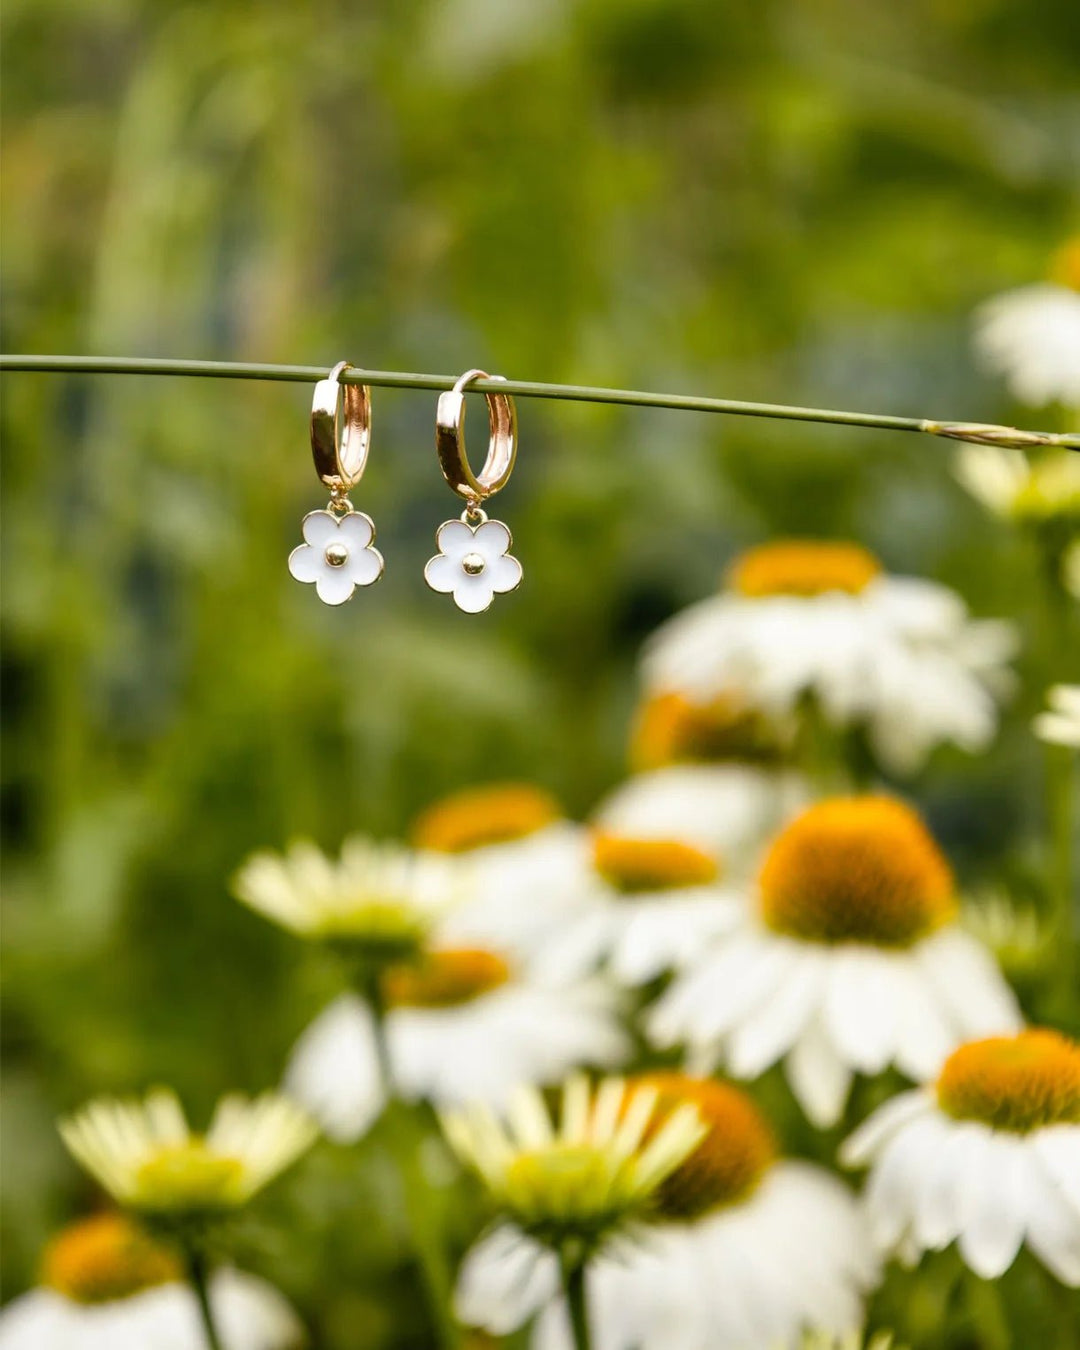 Daisy Flower Gold Hoop Earrings | TISH Jewelry - Pretty by Her- handmade locally in Cambridge, Ontario